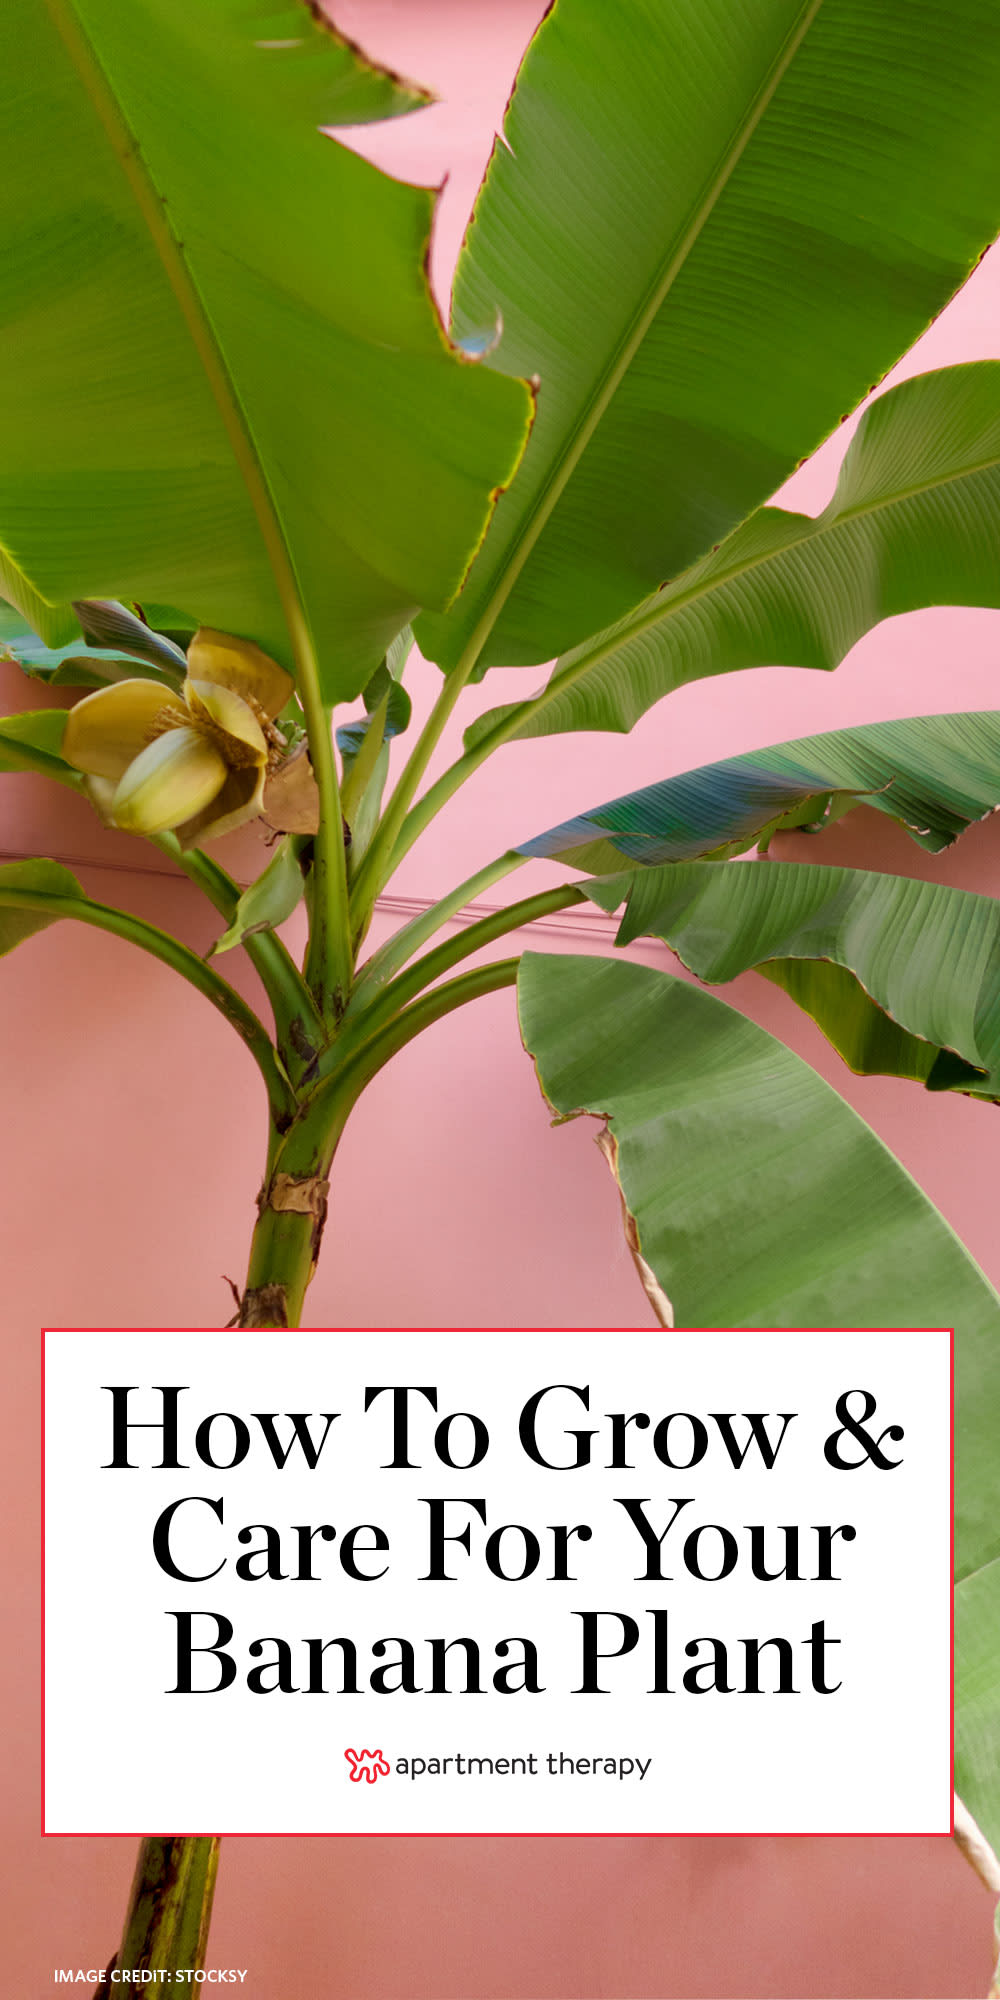 Banana plant care & growing guide